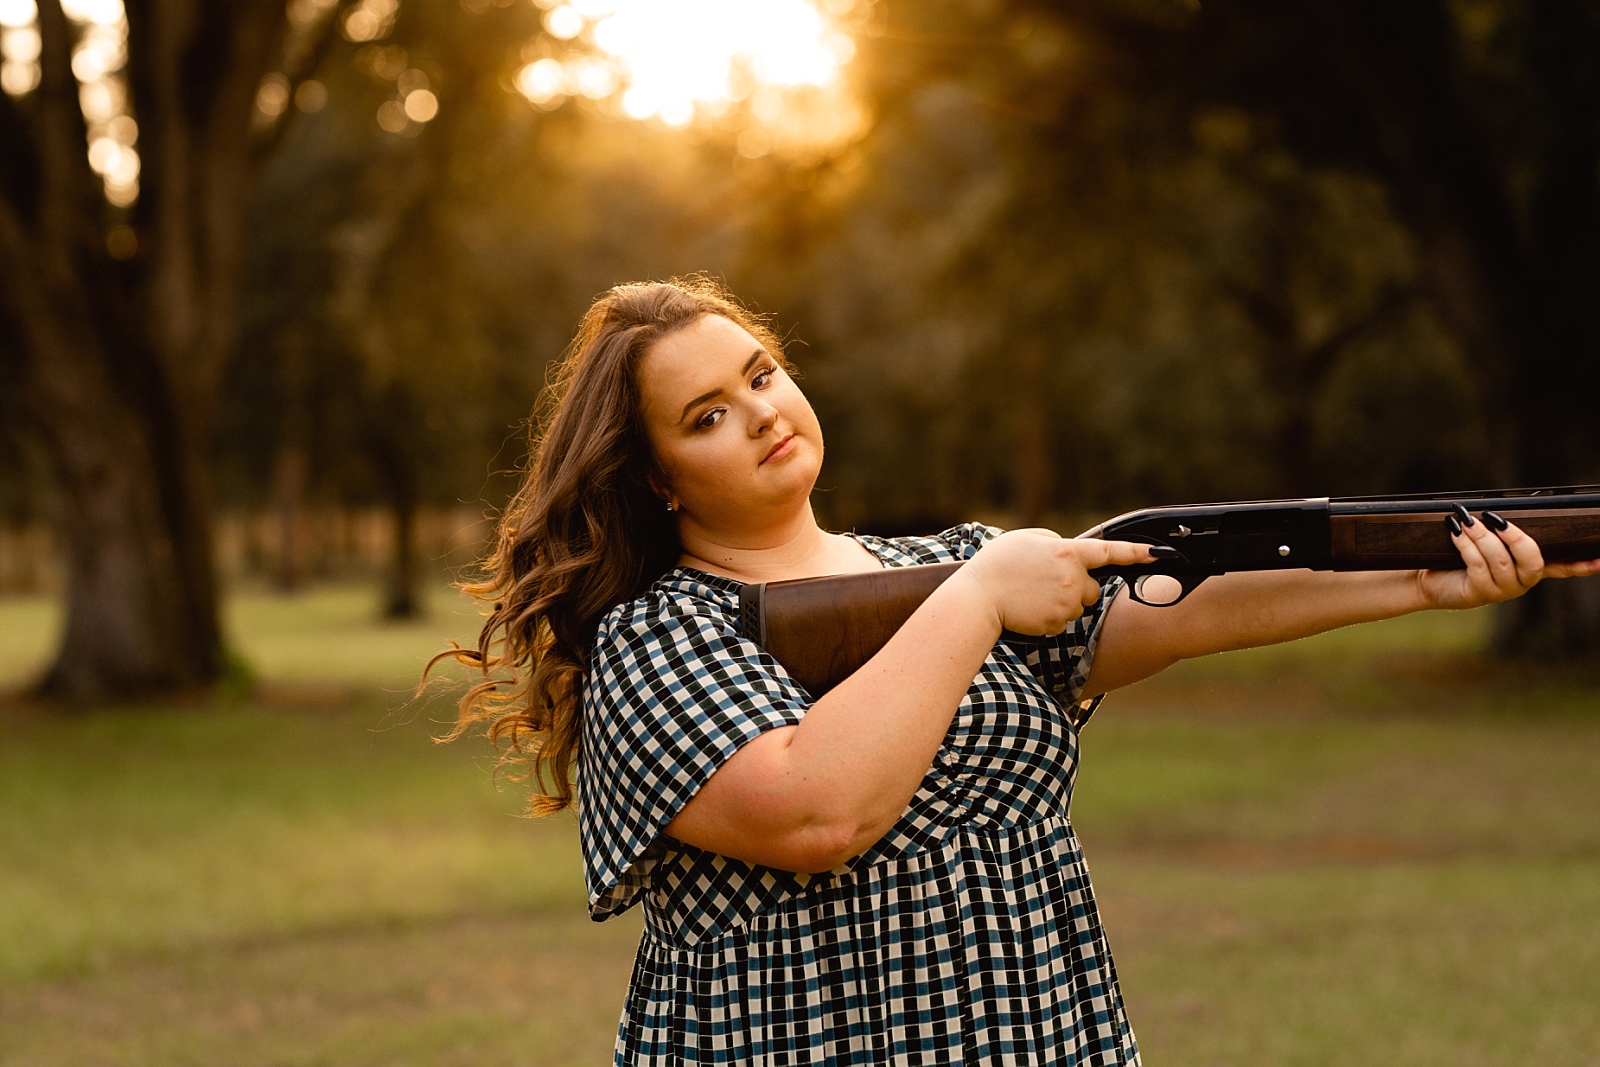 Senior photographer in the south takes photos of country girl with her rifle.